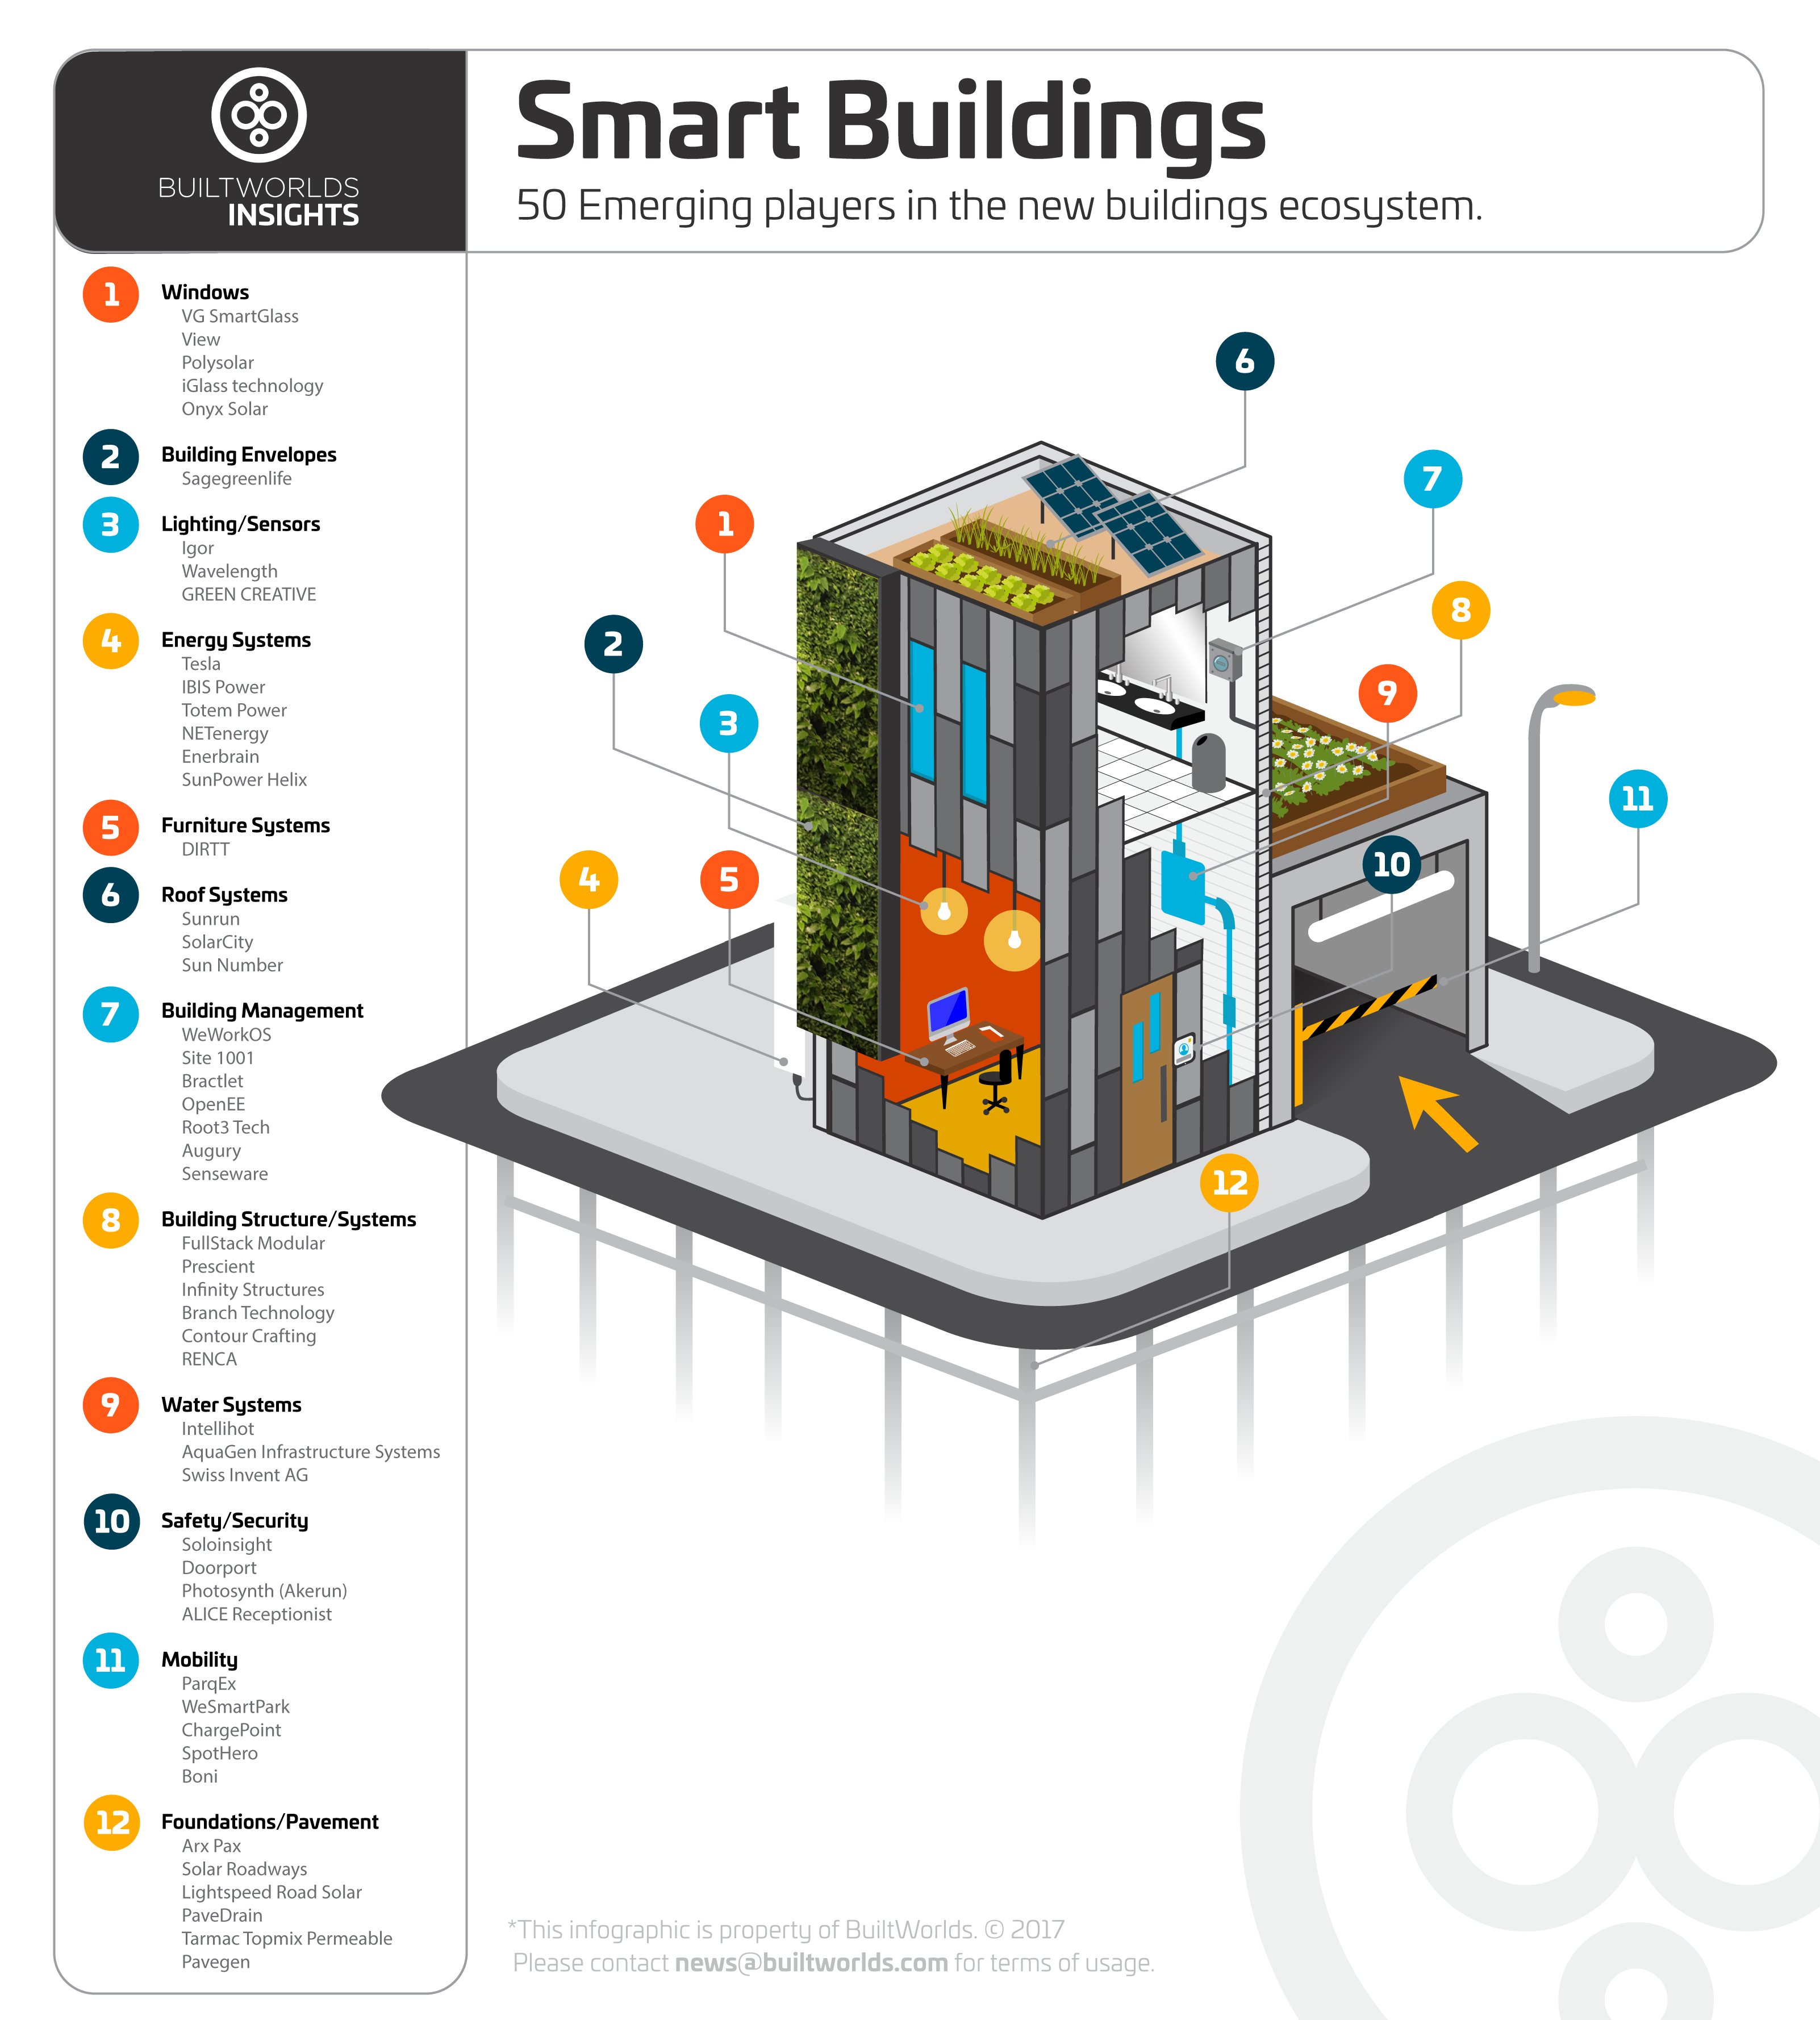 5 Common Myths About Smart Buildings Debunked